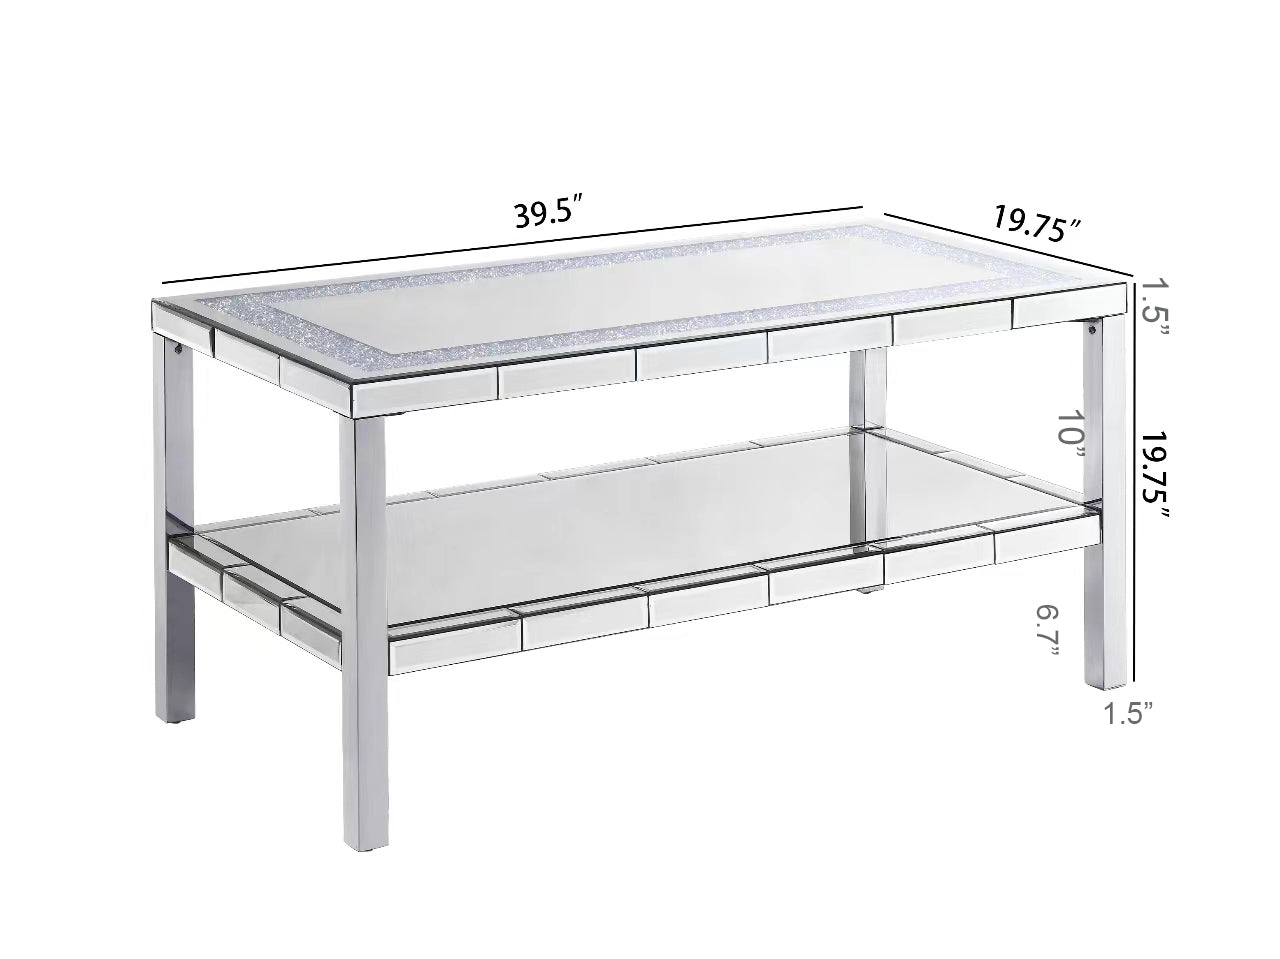 W 39.5" X D 19.5"X H 19.5" 2-layer crystal mirror stainless steel frame coffee table for use in offices, shops, living rooms, or bedrooms